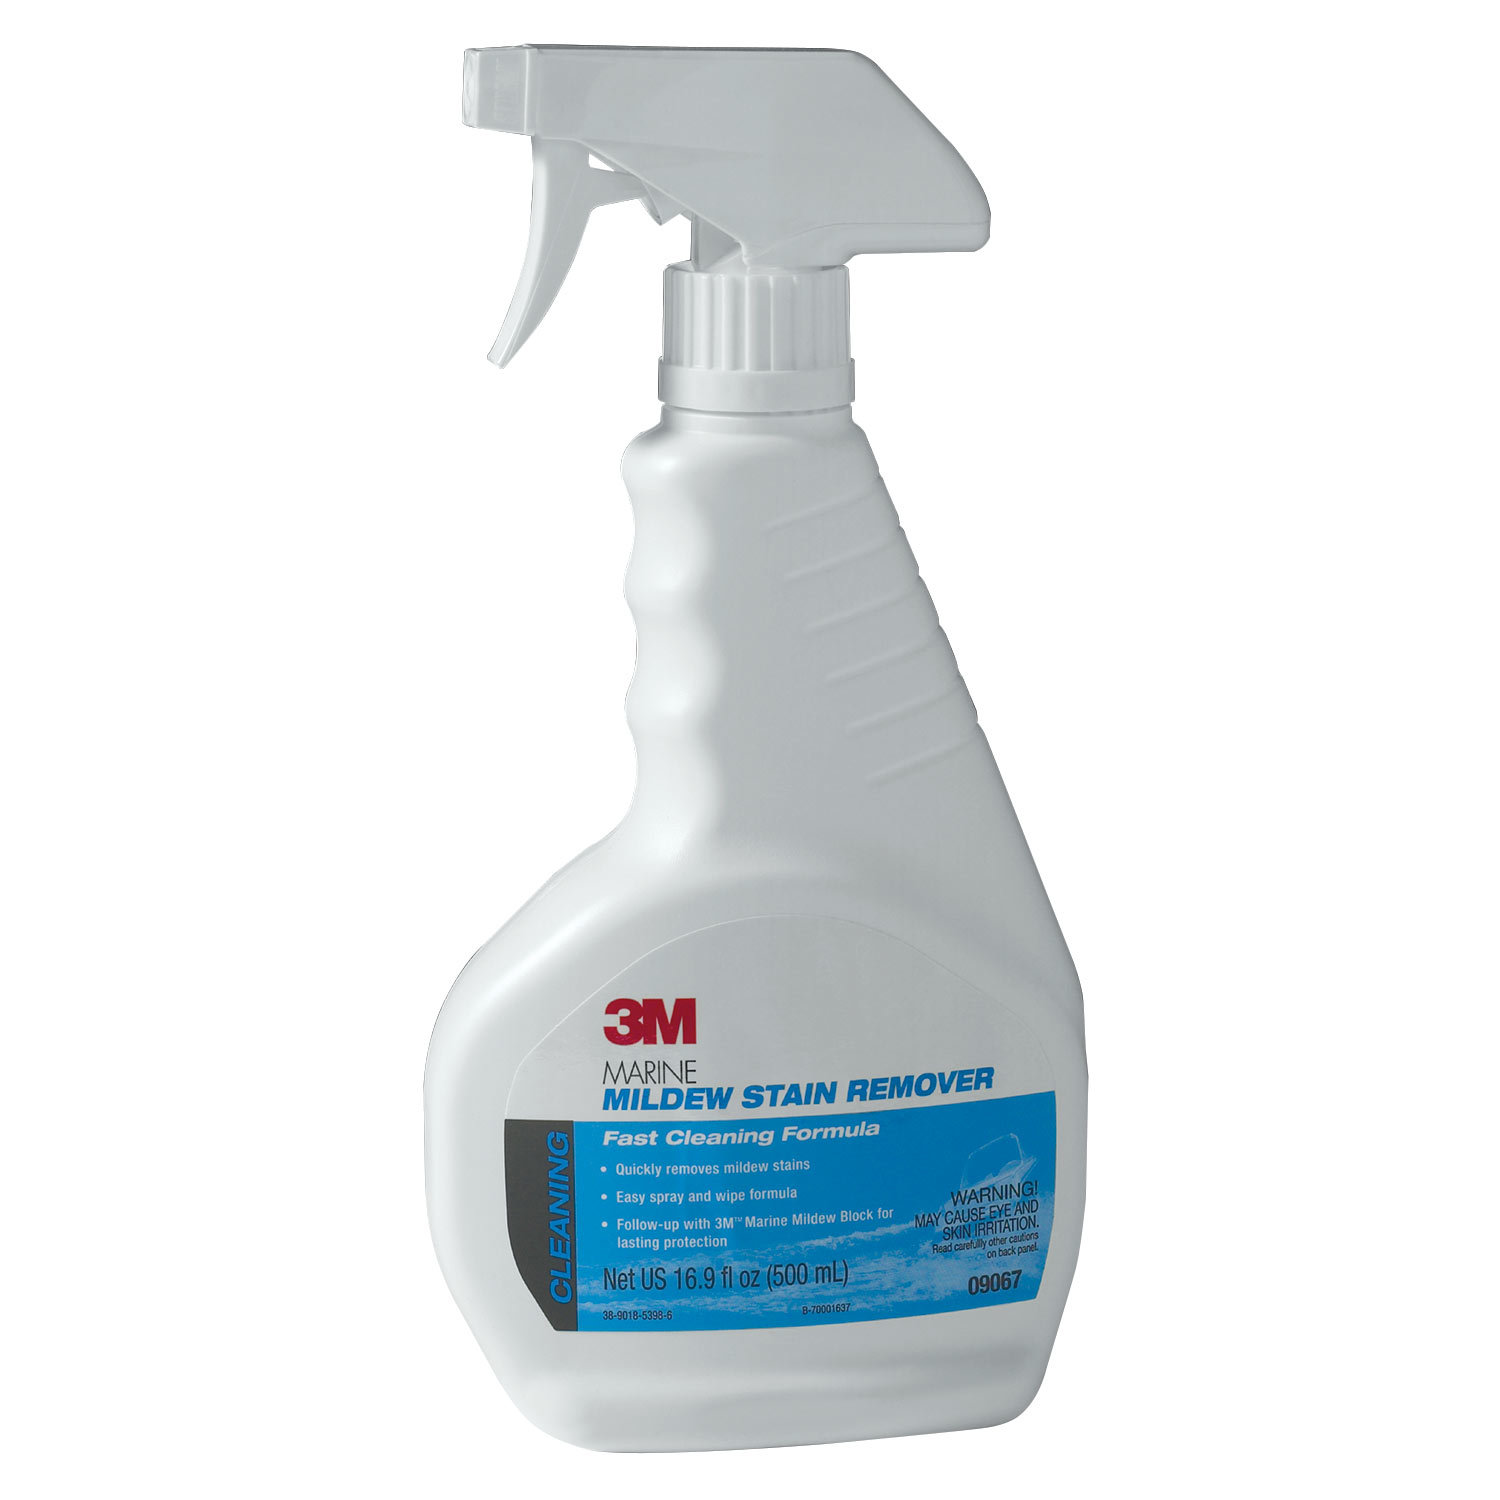 Mildew Remove, boat and yacht cleaning products